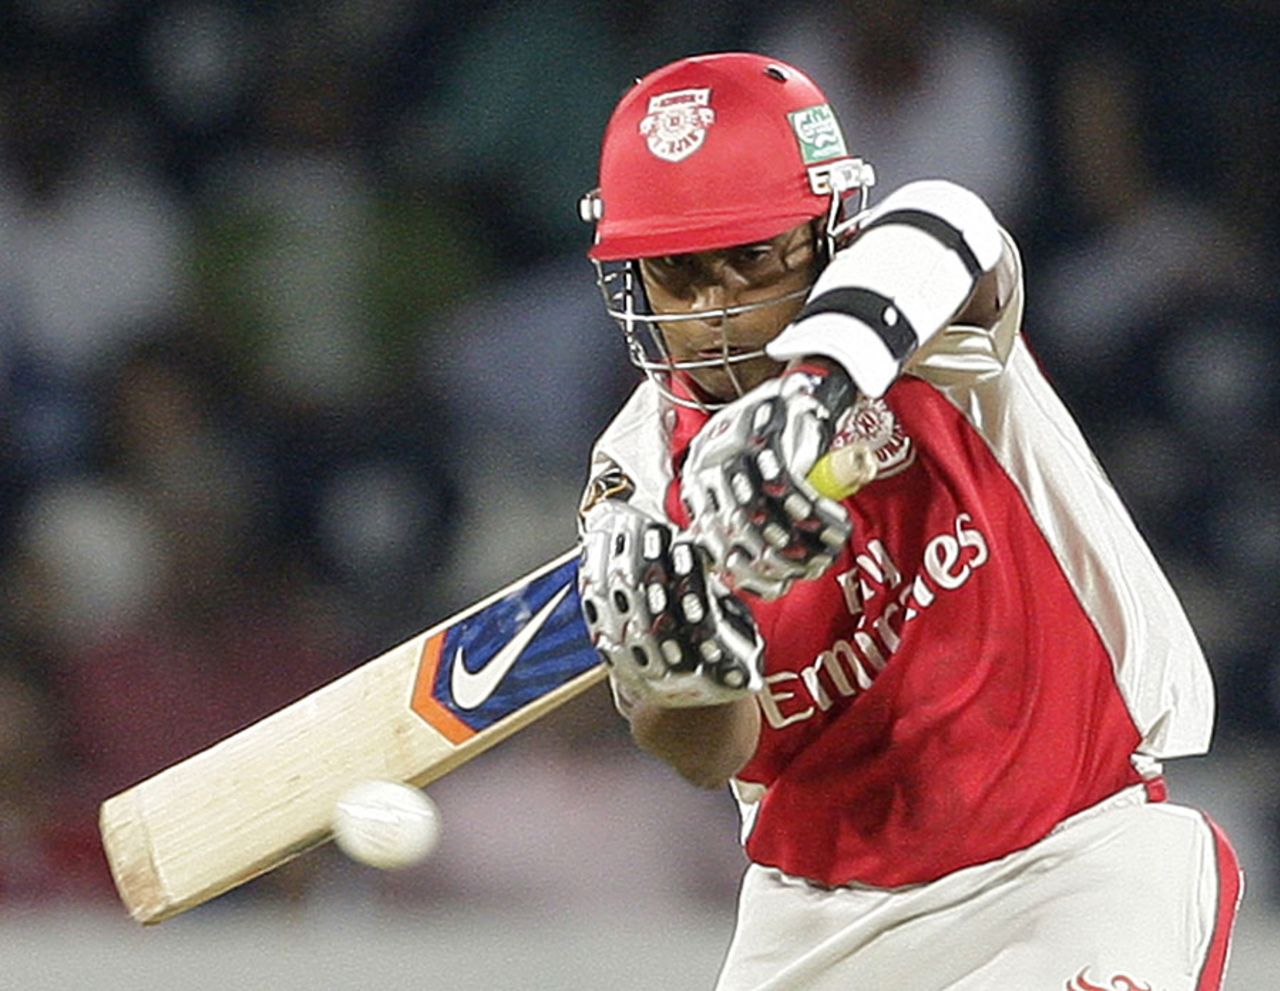 Paul Valthaty pulls the ball during a quickfire knock, Deccan Chargers v Kings XI Punjab, April 16, 2011